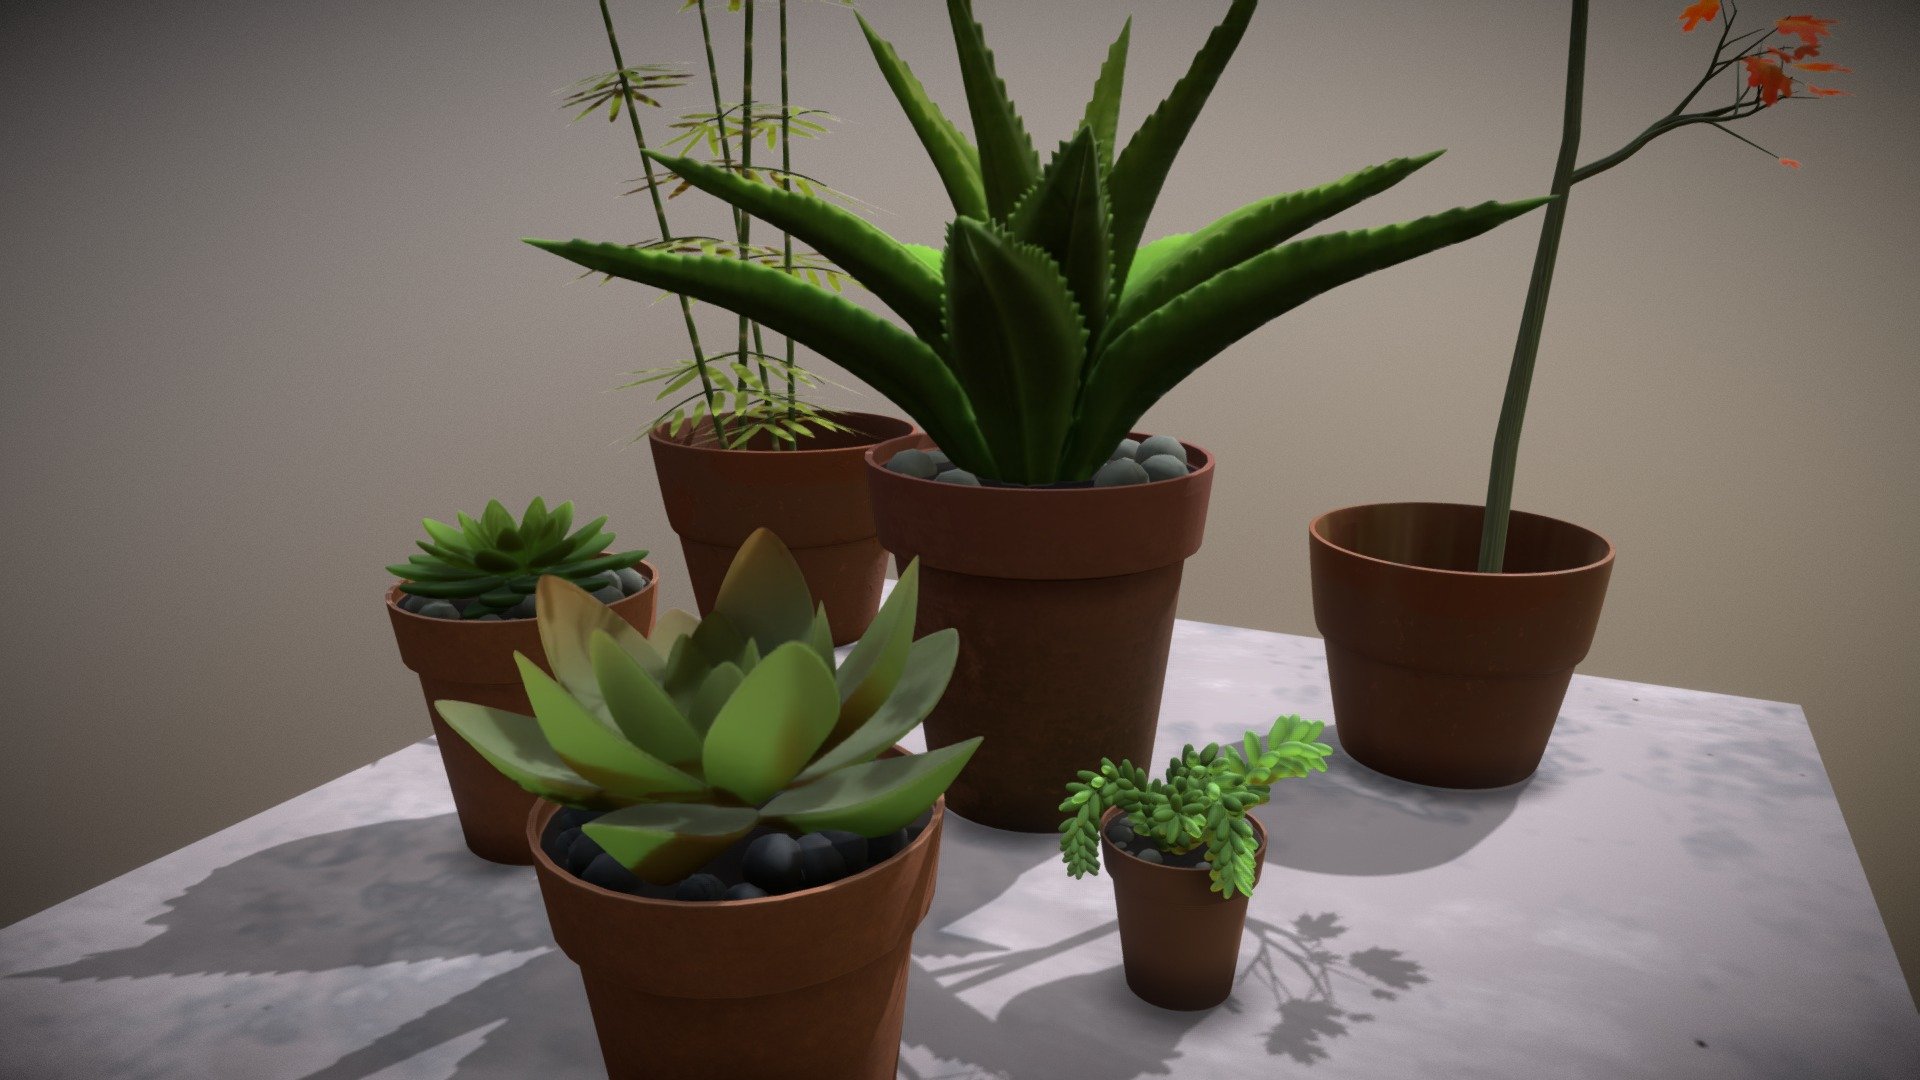 A set of plants to decorate your interior or exterior scene. Each plant has its own unified texture maps including diffuse, rough and normal.

The additional zip file contains four zipped packages in obj, collada, FBX and Sim format.  Sim is the native format of Simlab Composer 3d model